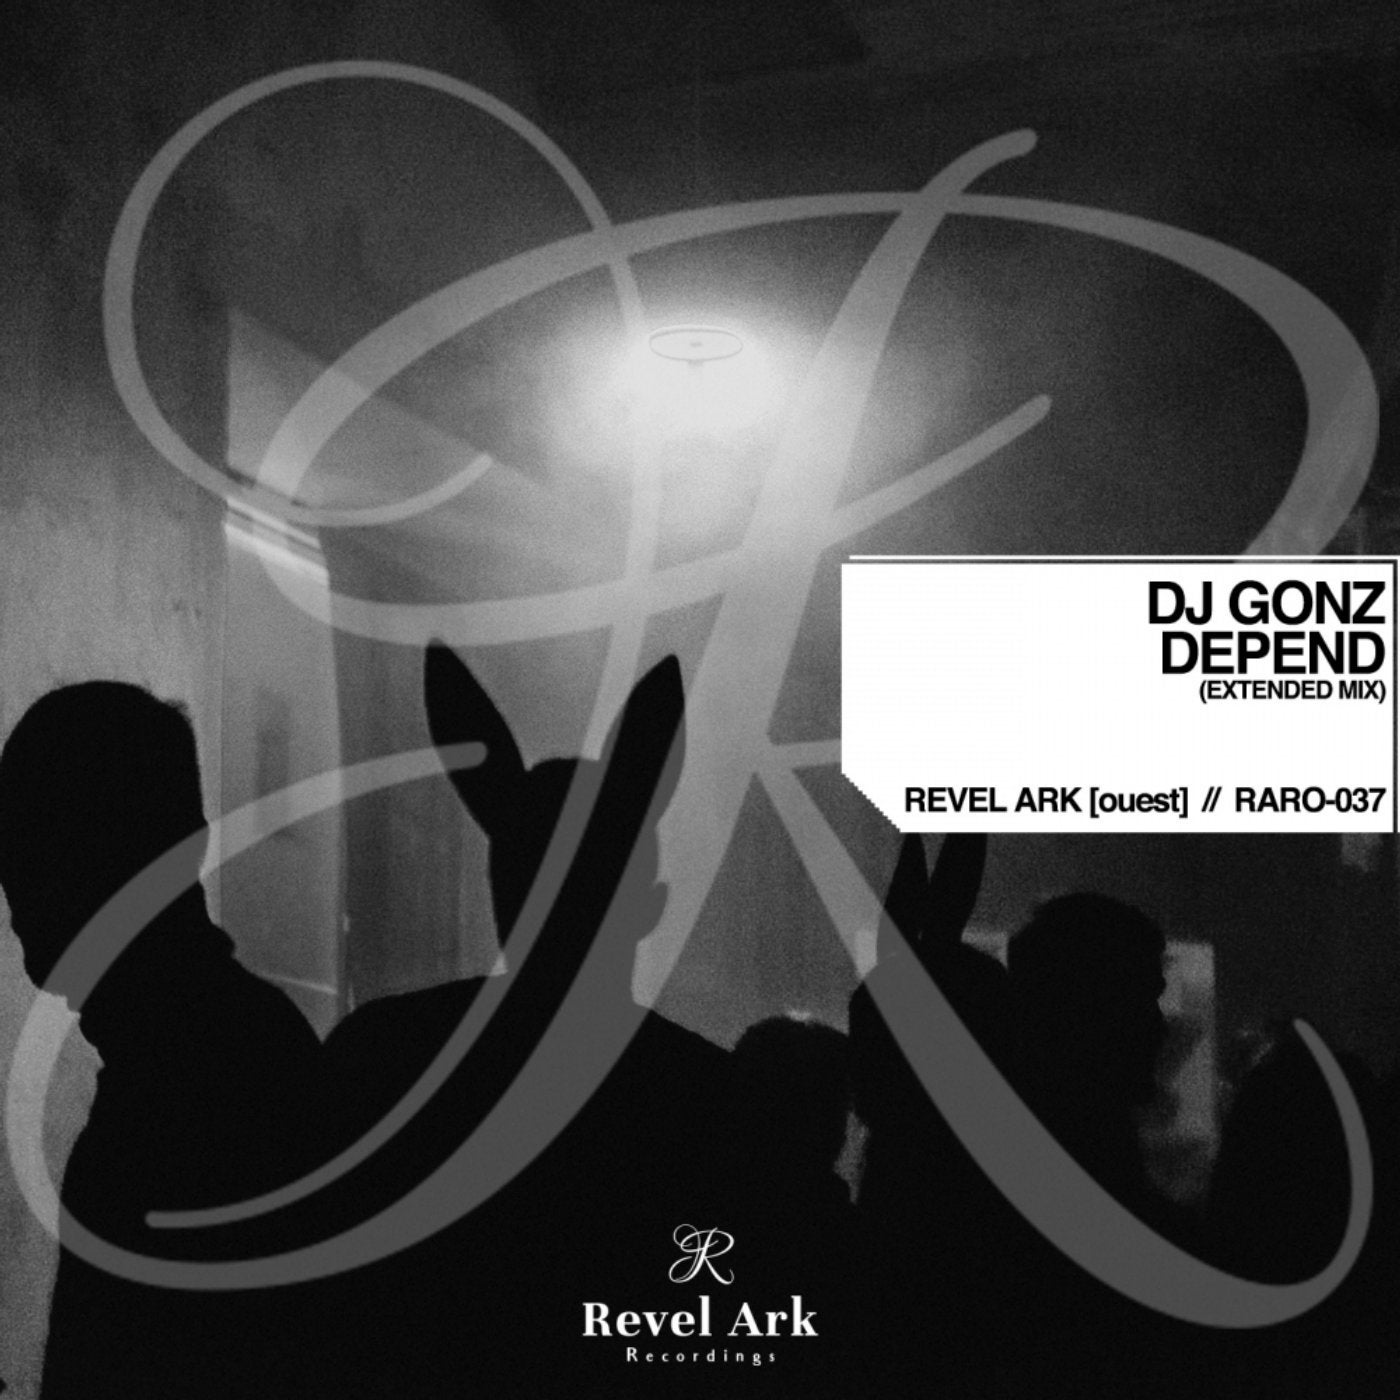 Depend (Extended Mix)